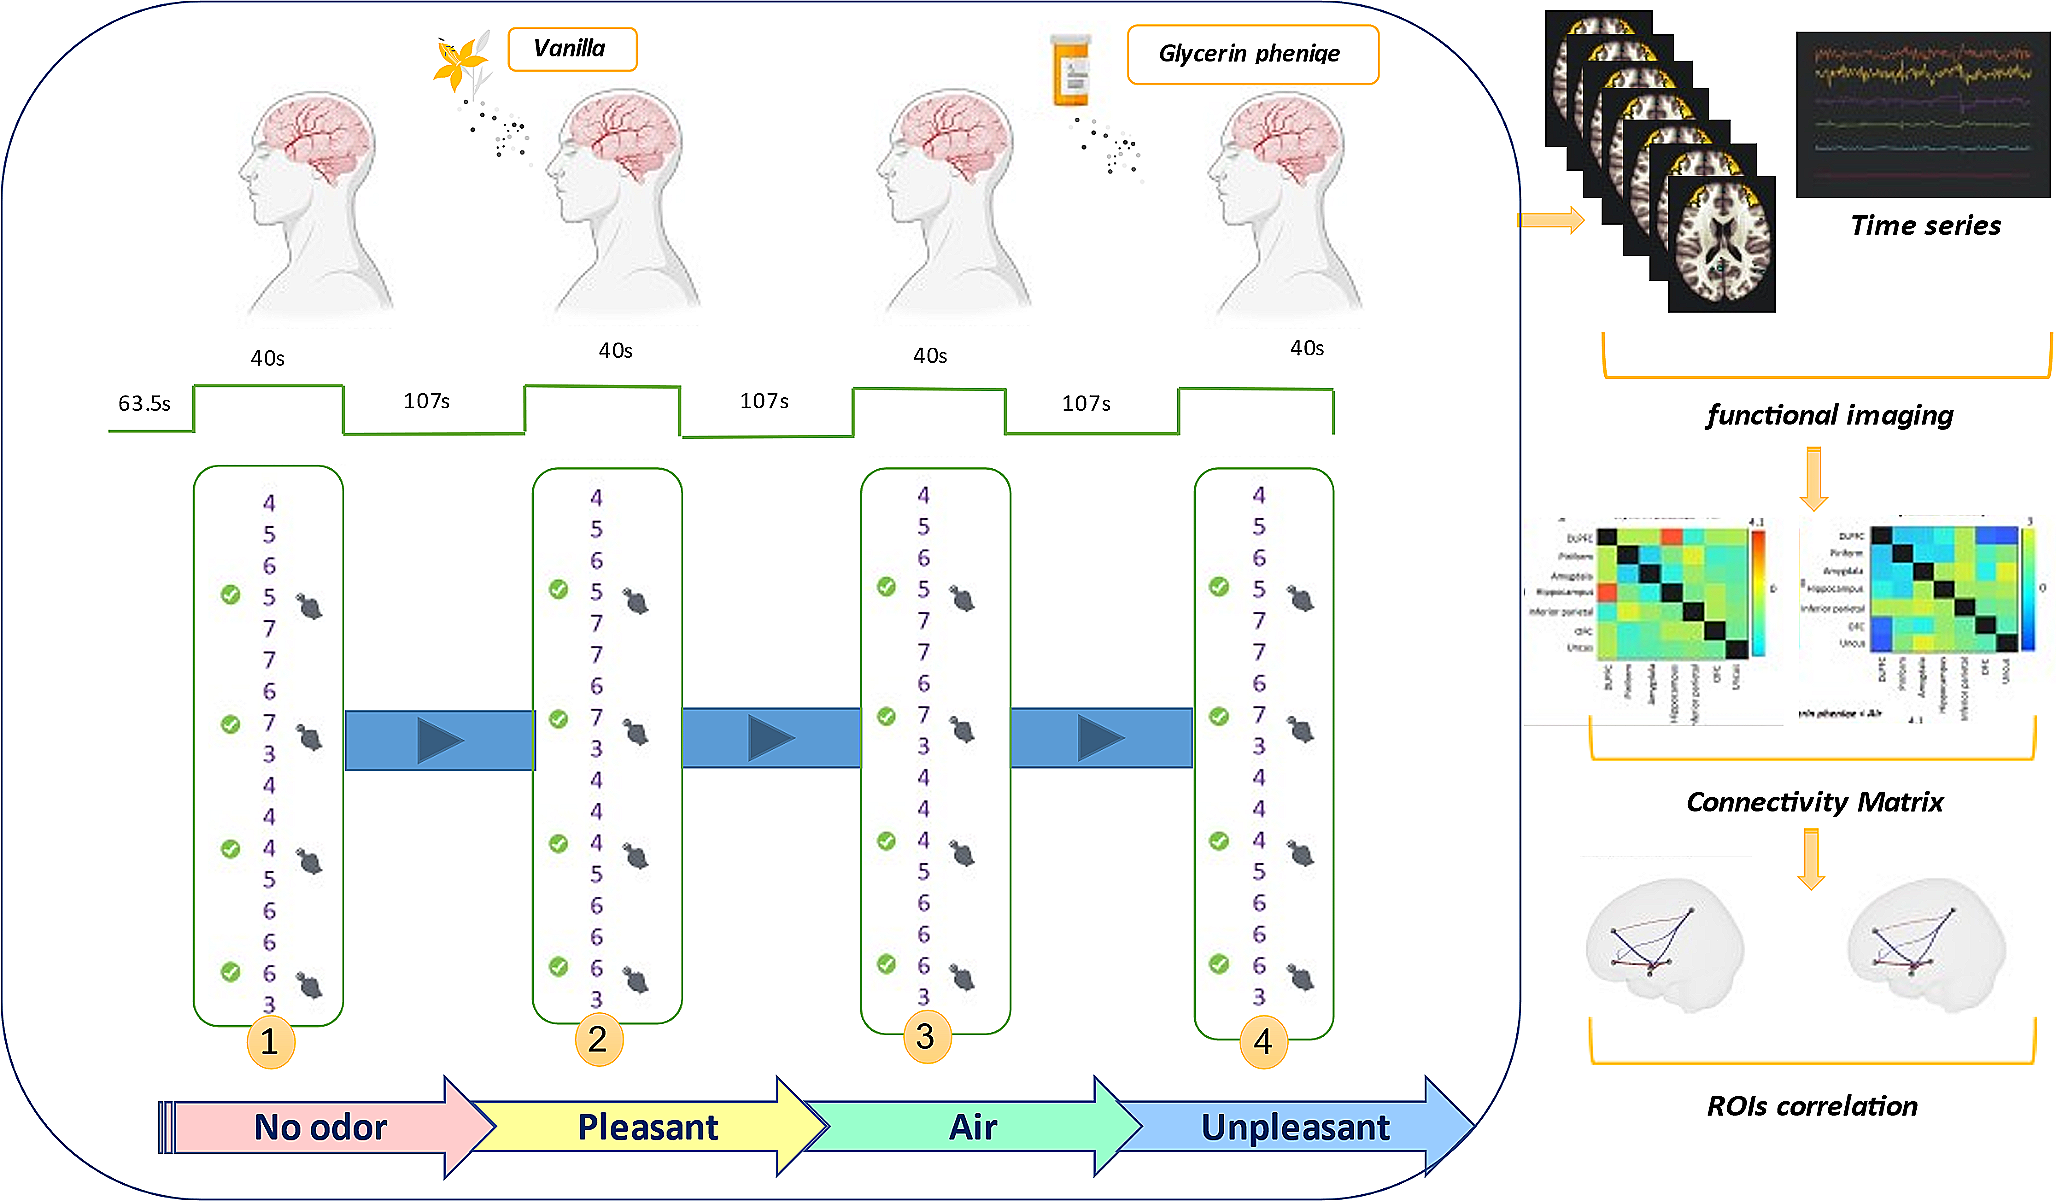 An fMRI-based investigation of the effects of odors on the functional connectivity network underlying the working memory